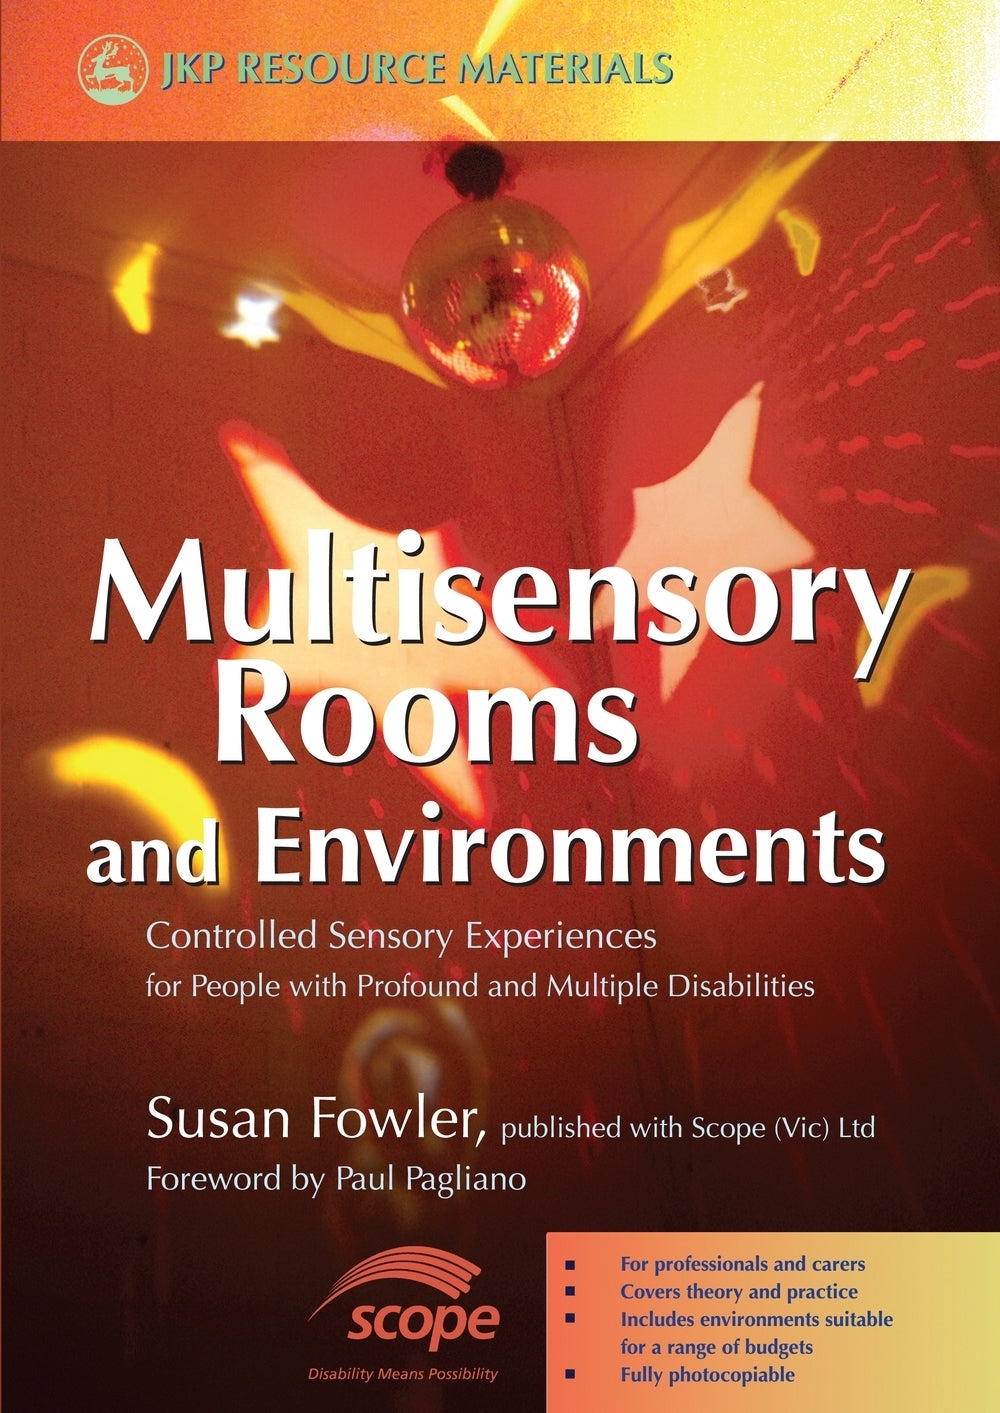 Multisensory Rooms and Environments by Susan Fowler, Paul Pagliano